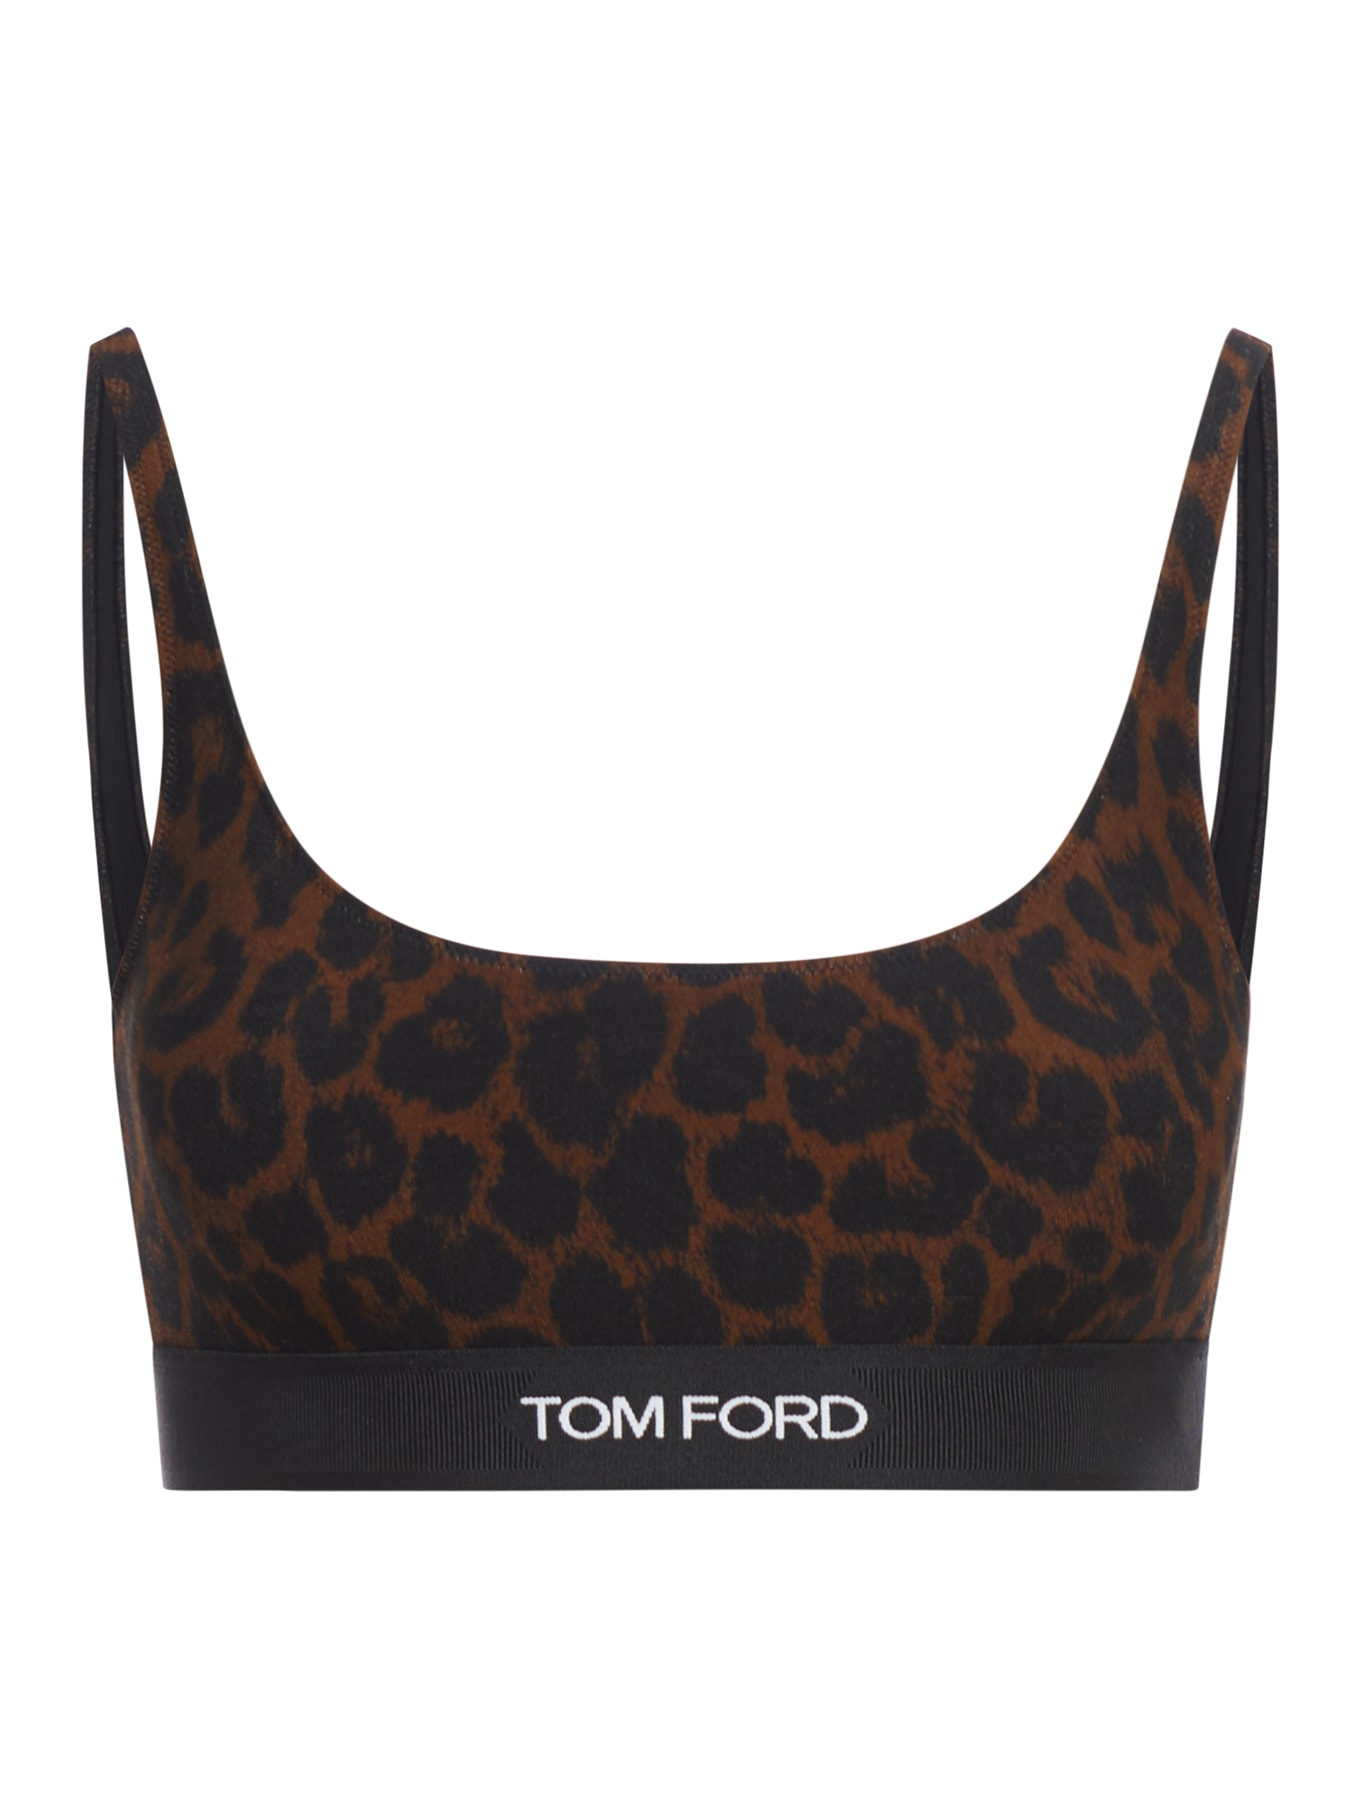 TOM FORD REFLECTED LEOPARD PRINTED MODAL SIGNATURE BRALETTE